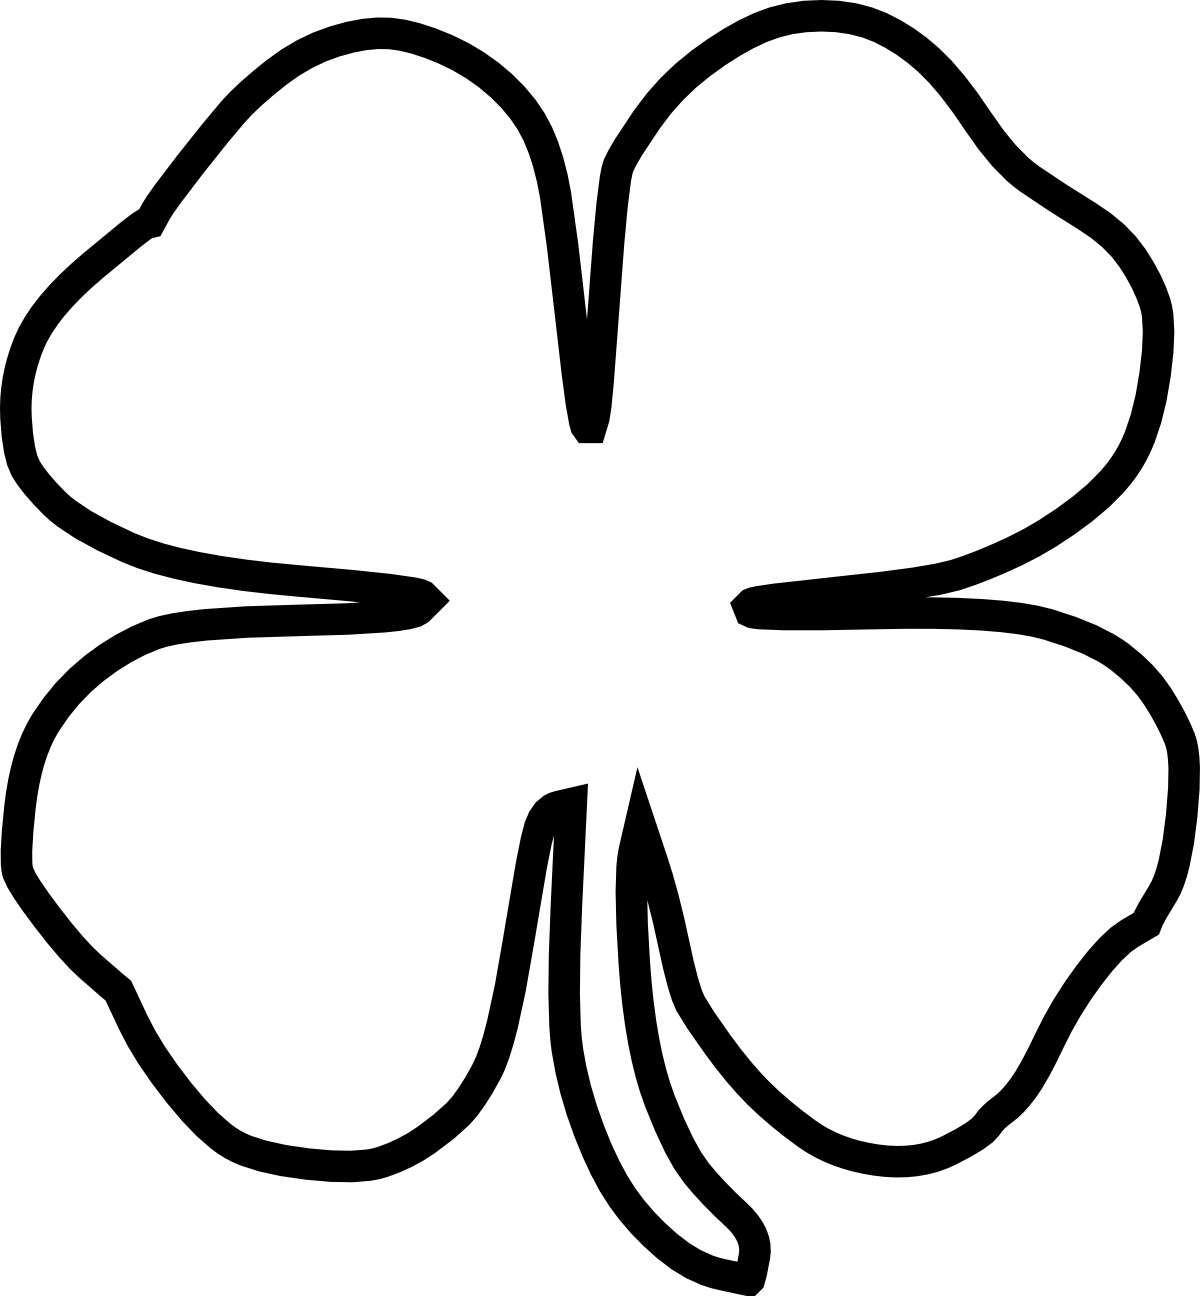 Template Of A Four Leaf Clover